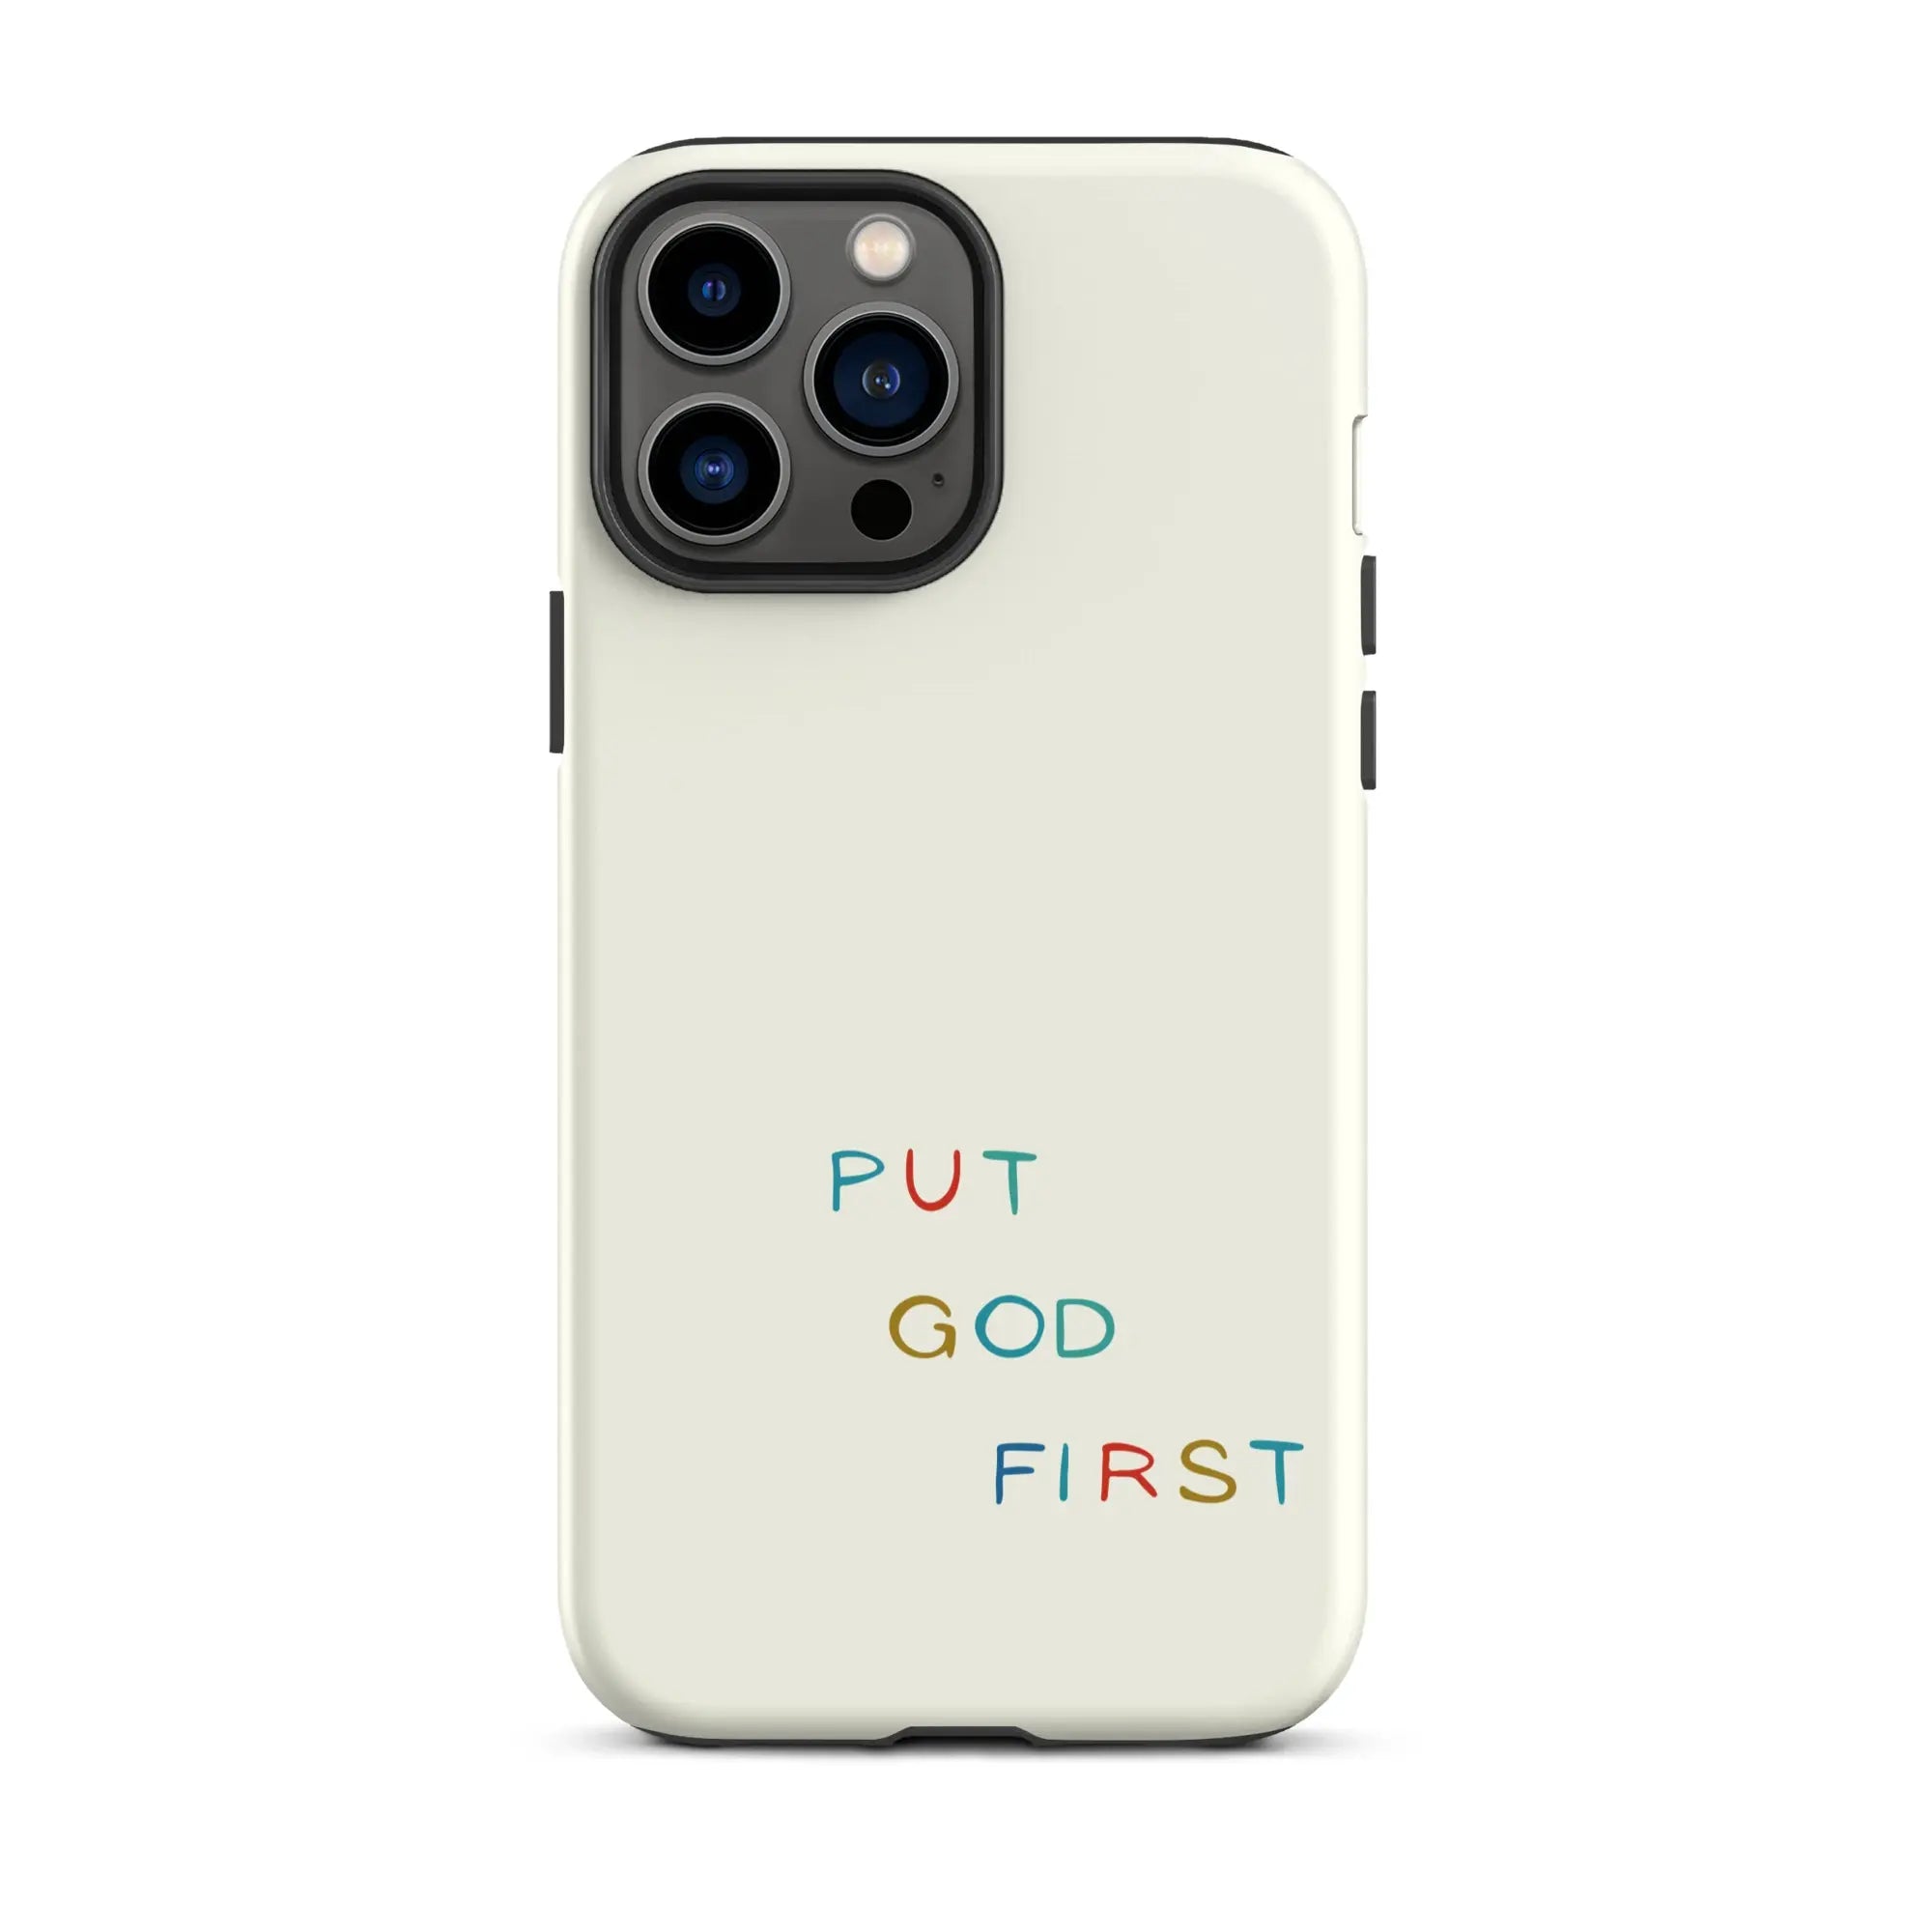 Cream-colored minimalist iPhone case with 'PUT GOD FIRST' in playful, multicolored lettering, embodying a simple yet profound statement of faith.